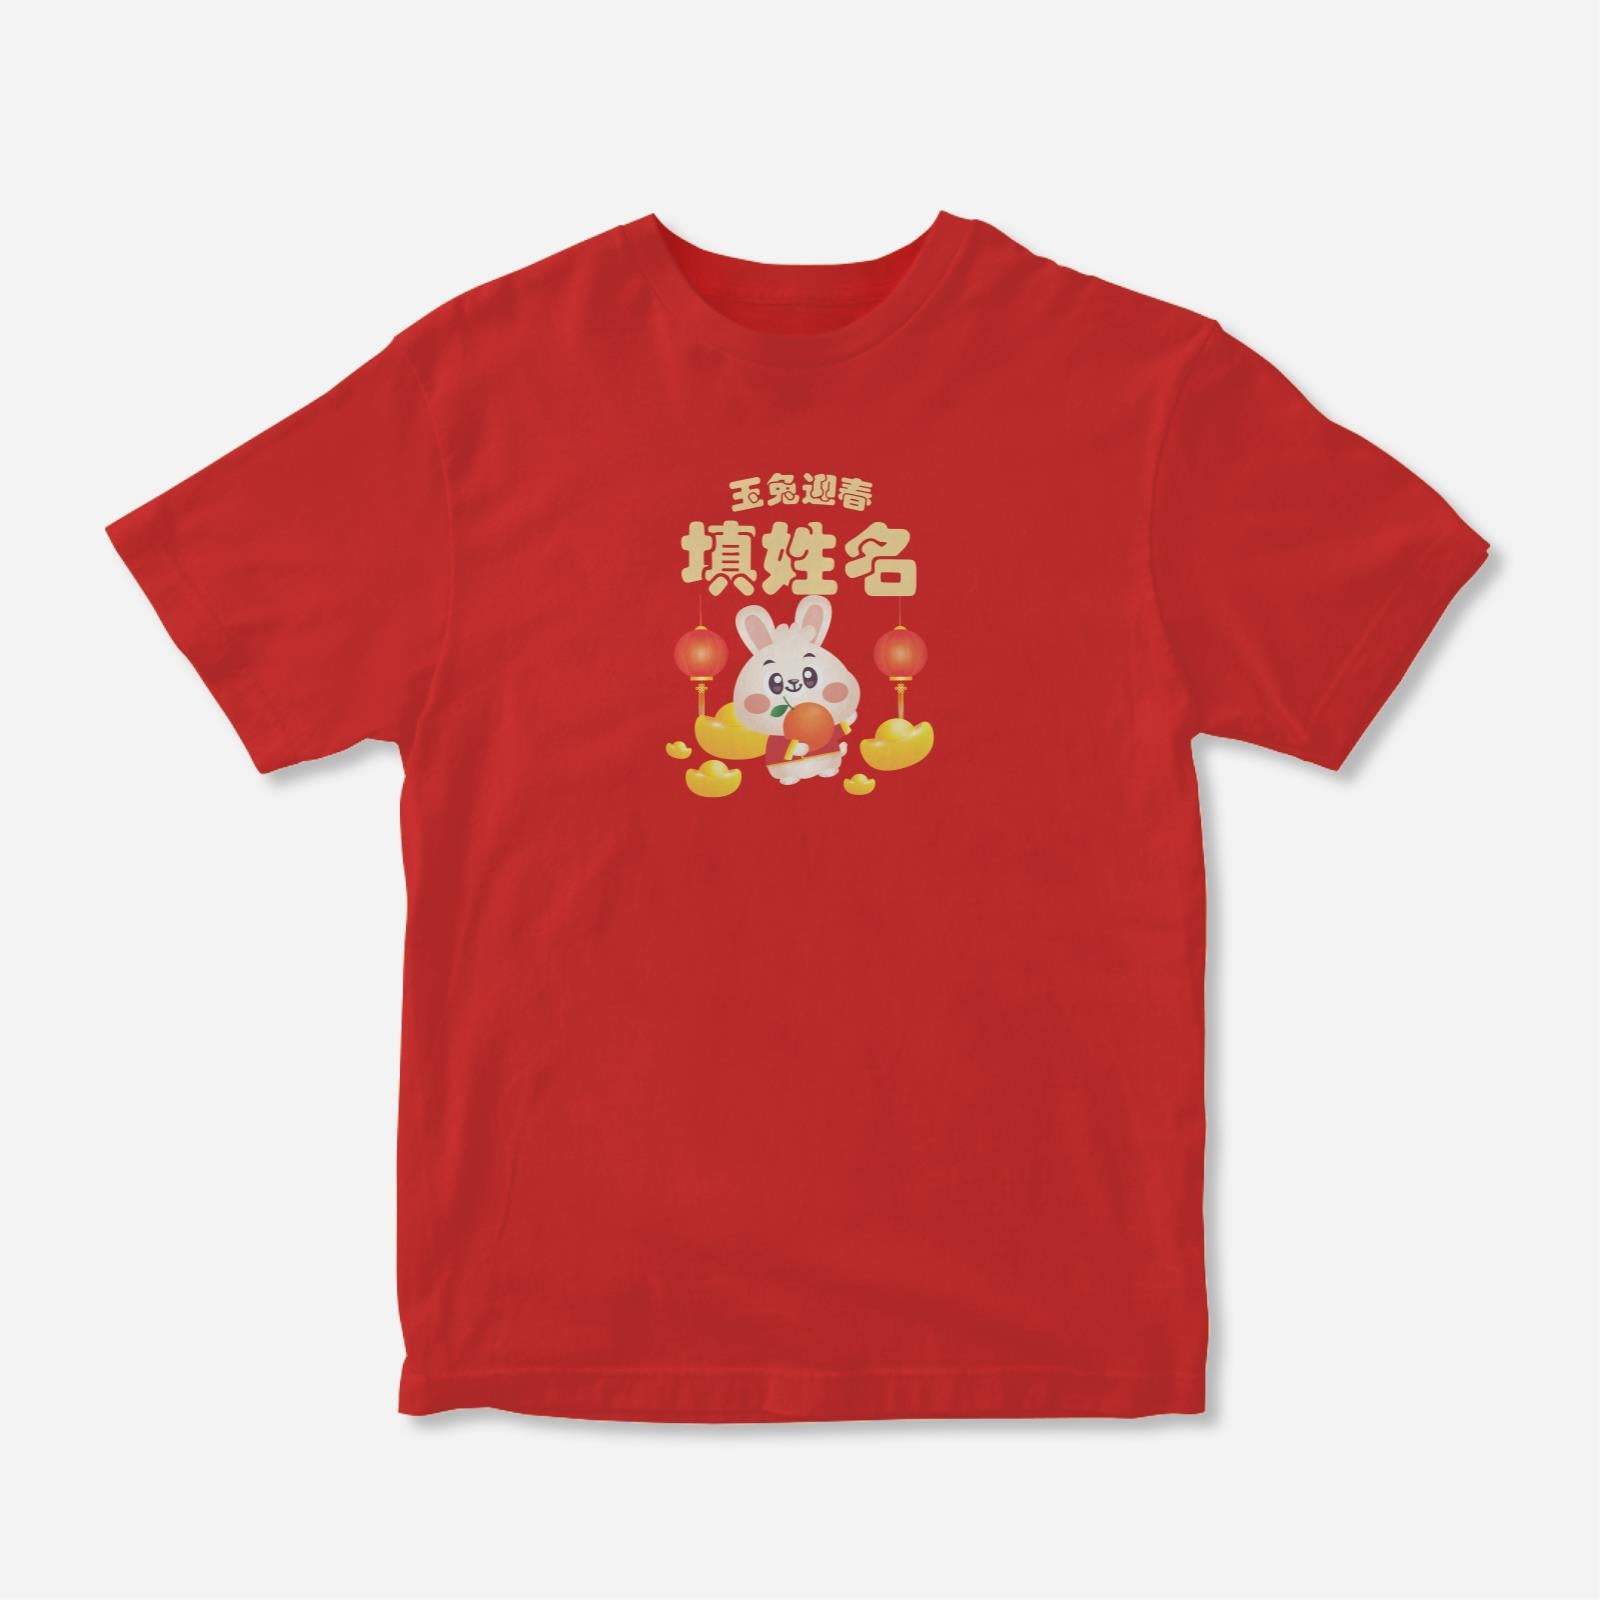 Cny Rabbit Family - Brother Rabbit Kids Tee Shirt with Chinese Personalization